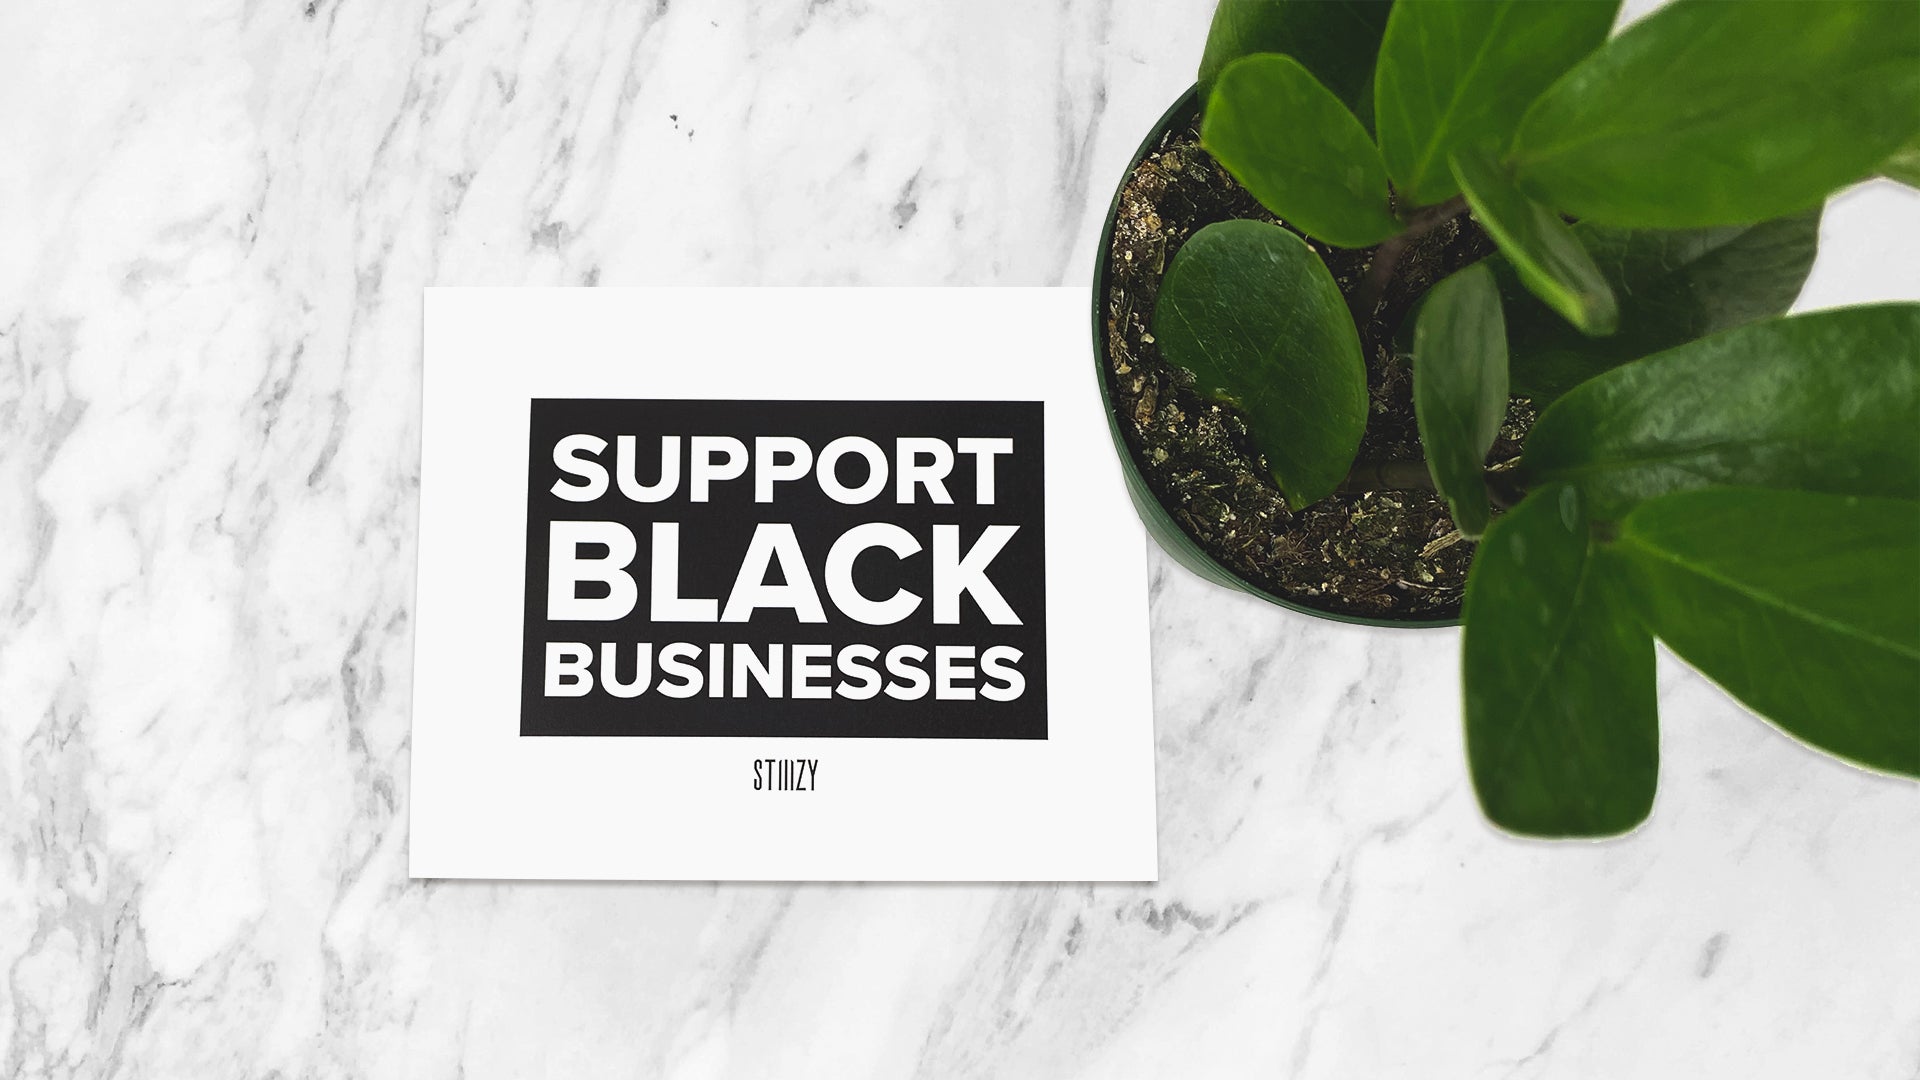 SUPPORT BLACK BUSINESS